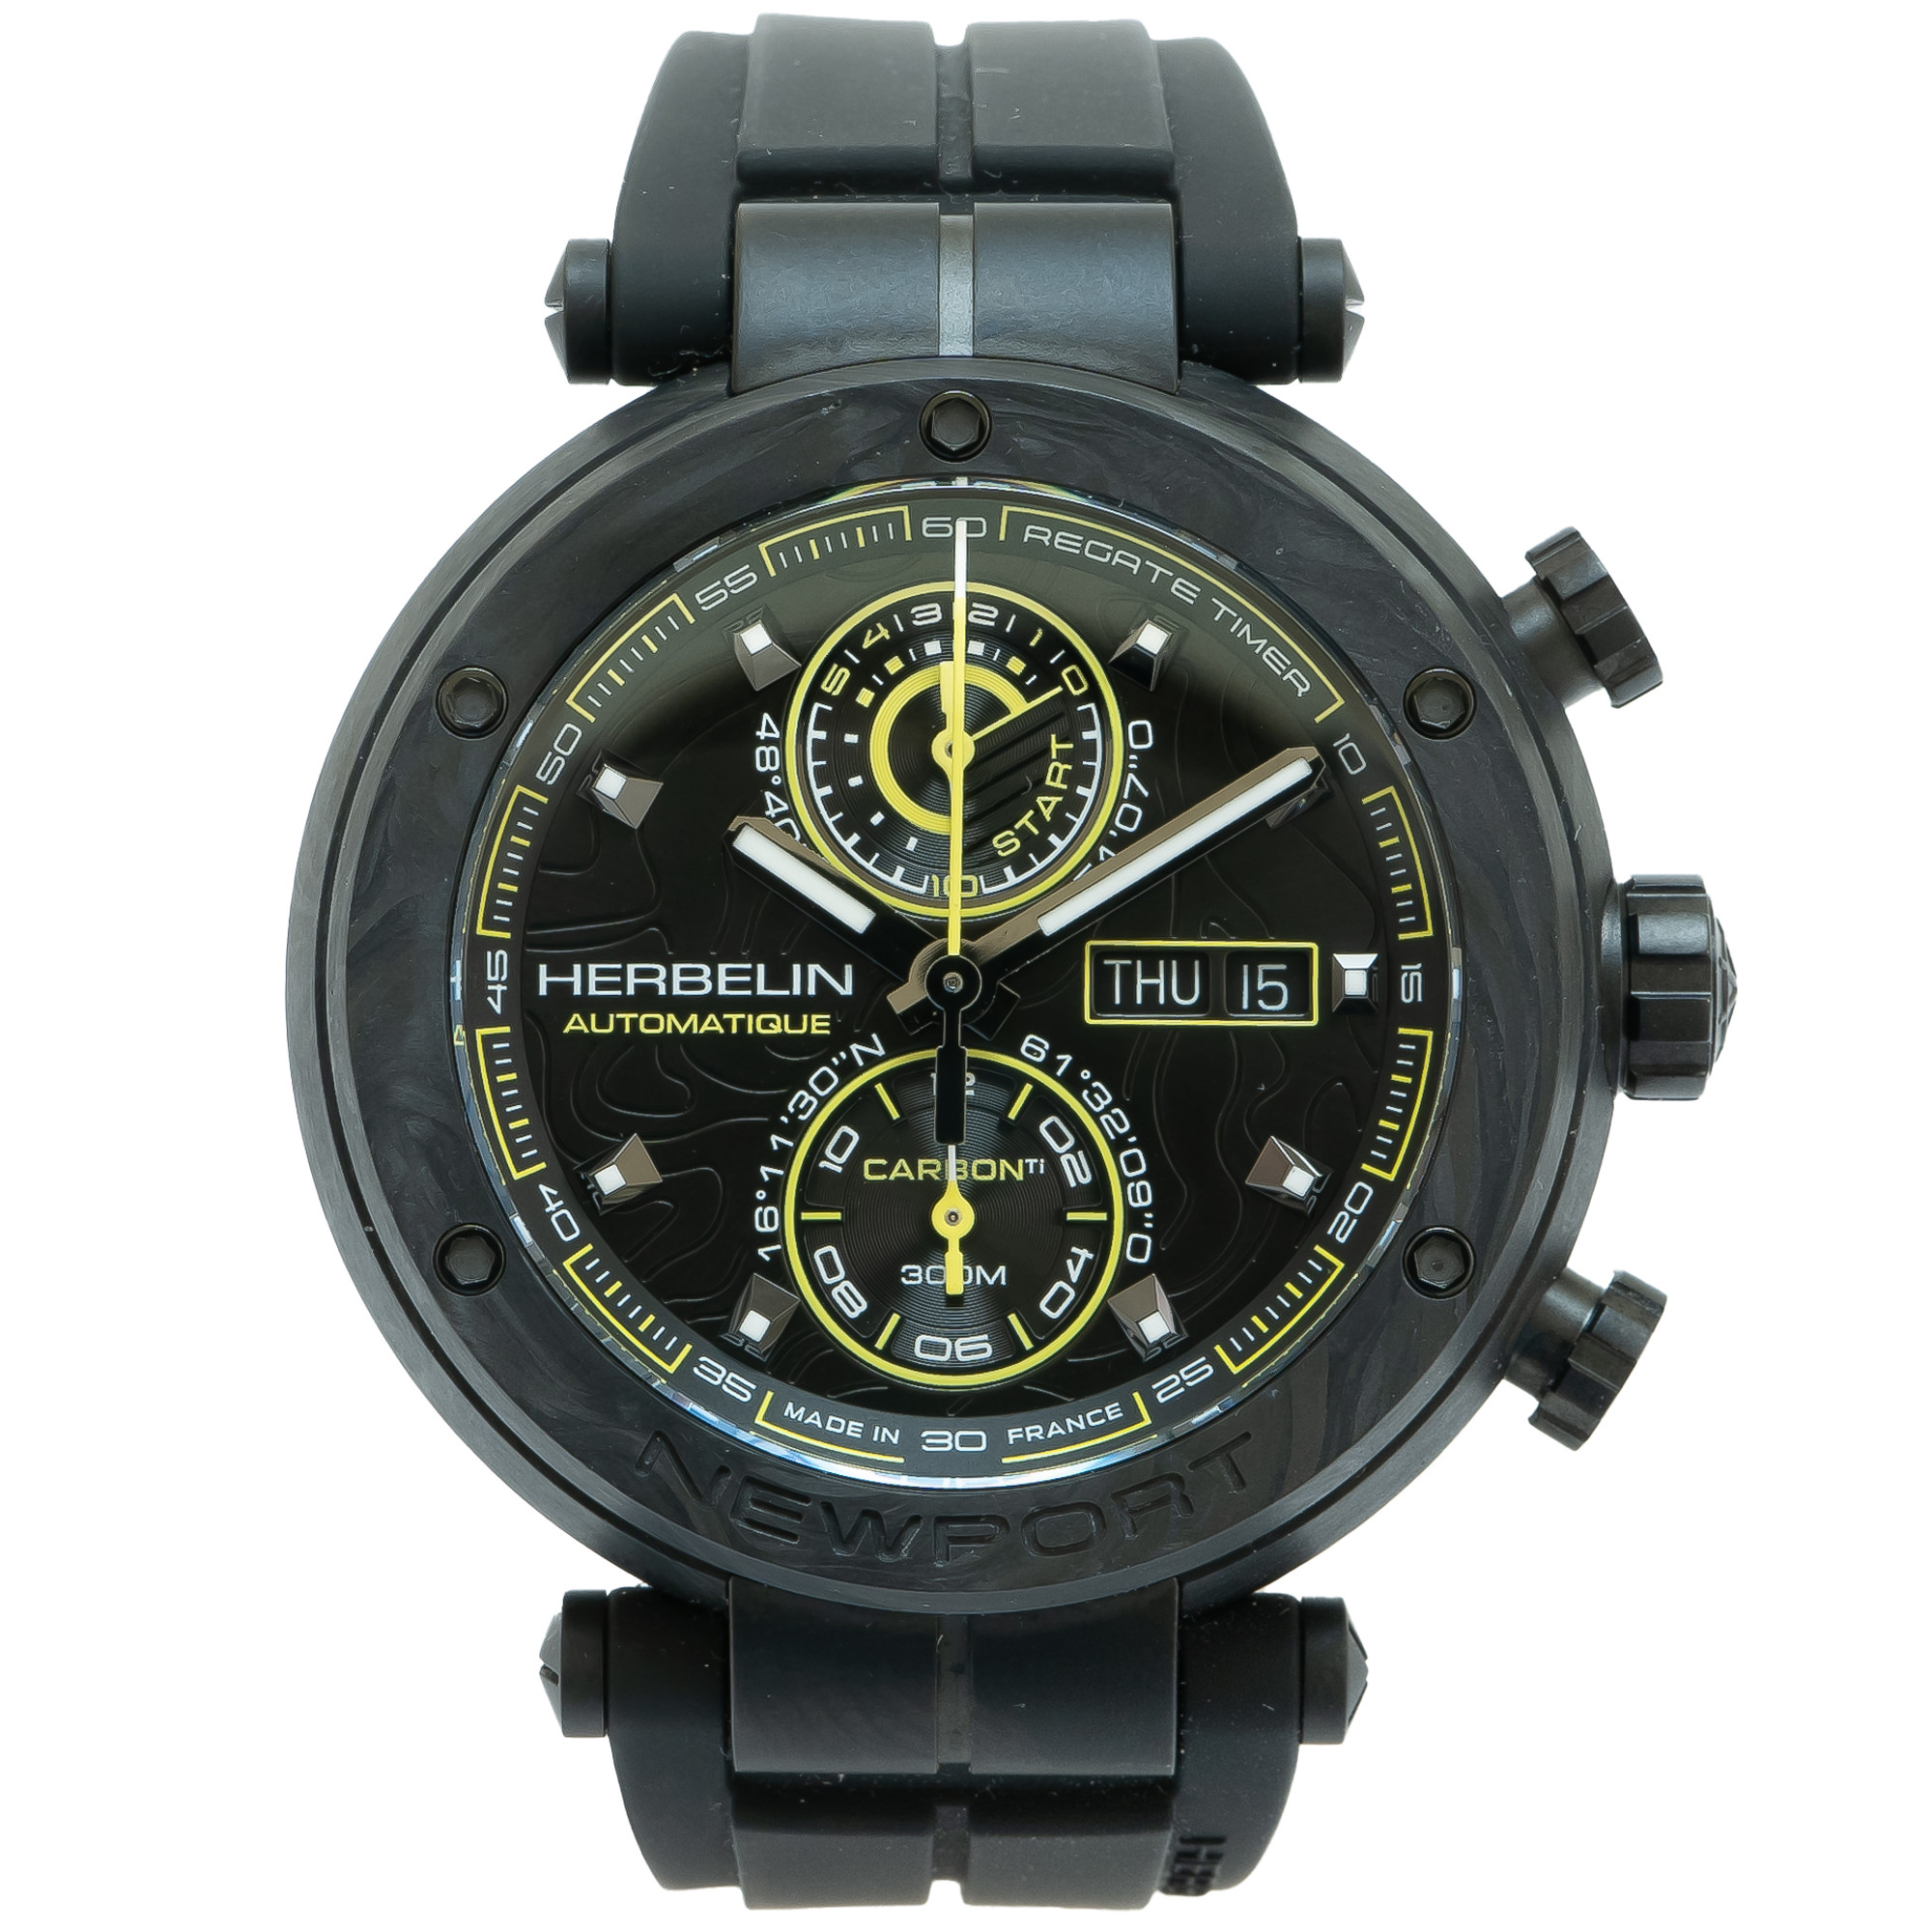 Herbelin Newport Carbon 288 Chronograph *Limited Edition* - Inventory 5642